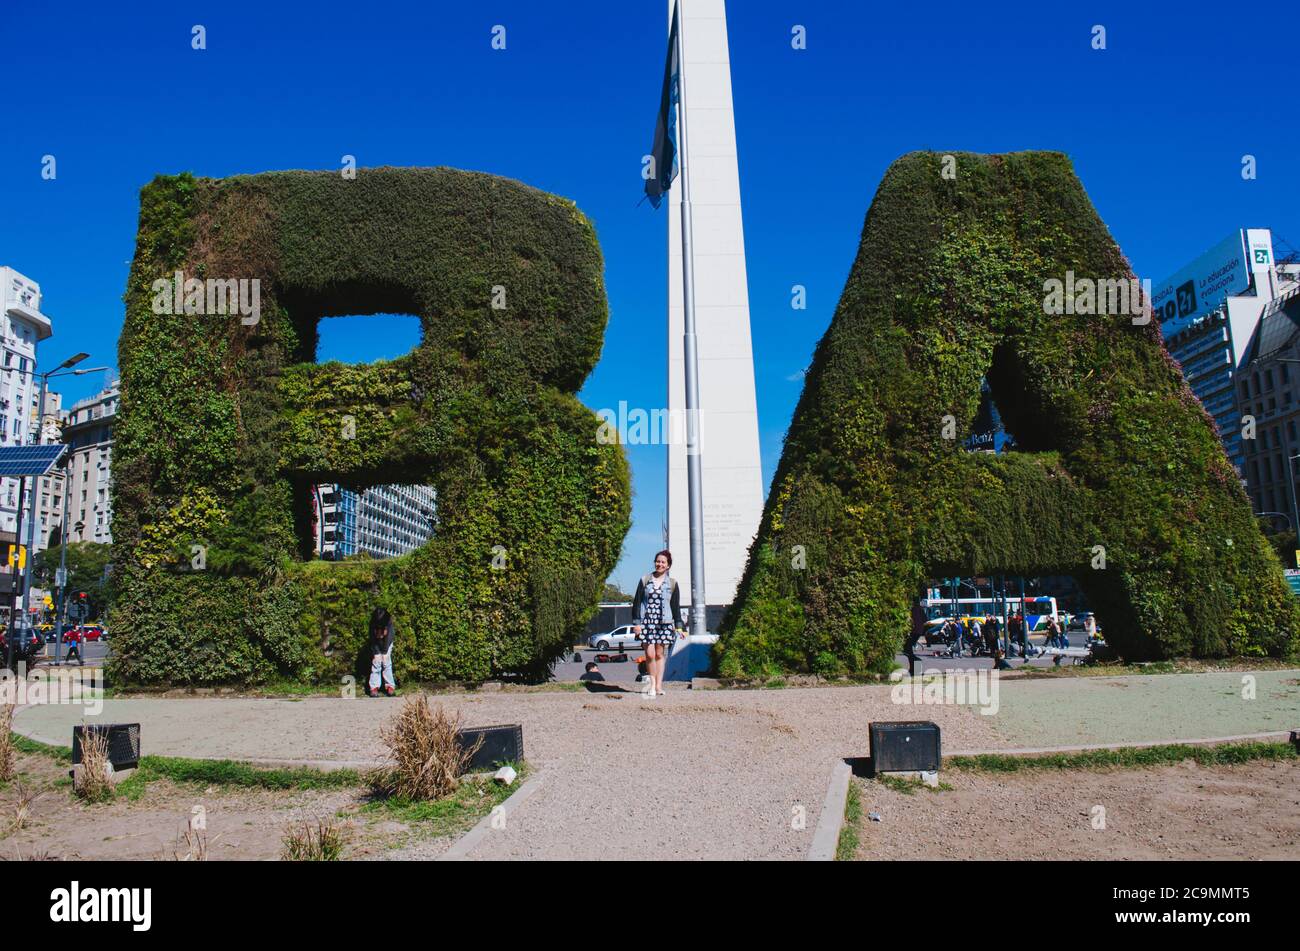 Buenos Aires, Argentina - September 4, 2018: Tourists in front of the famous Argentinian Obelisk taking selfies and group pictures. Stock Photo